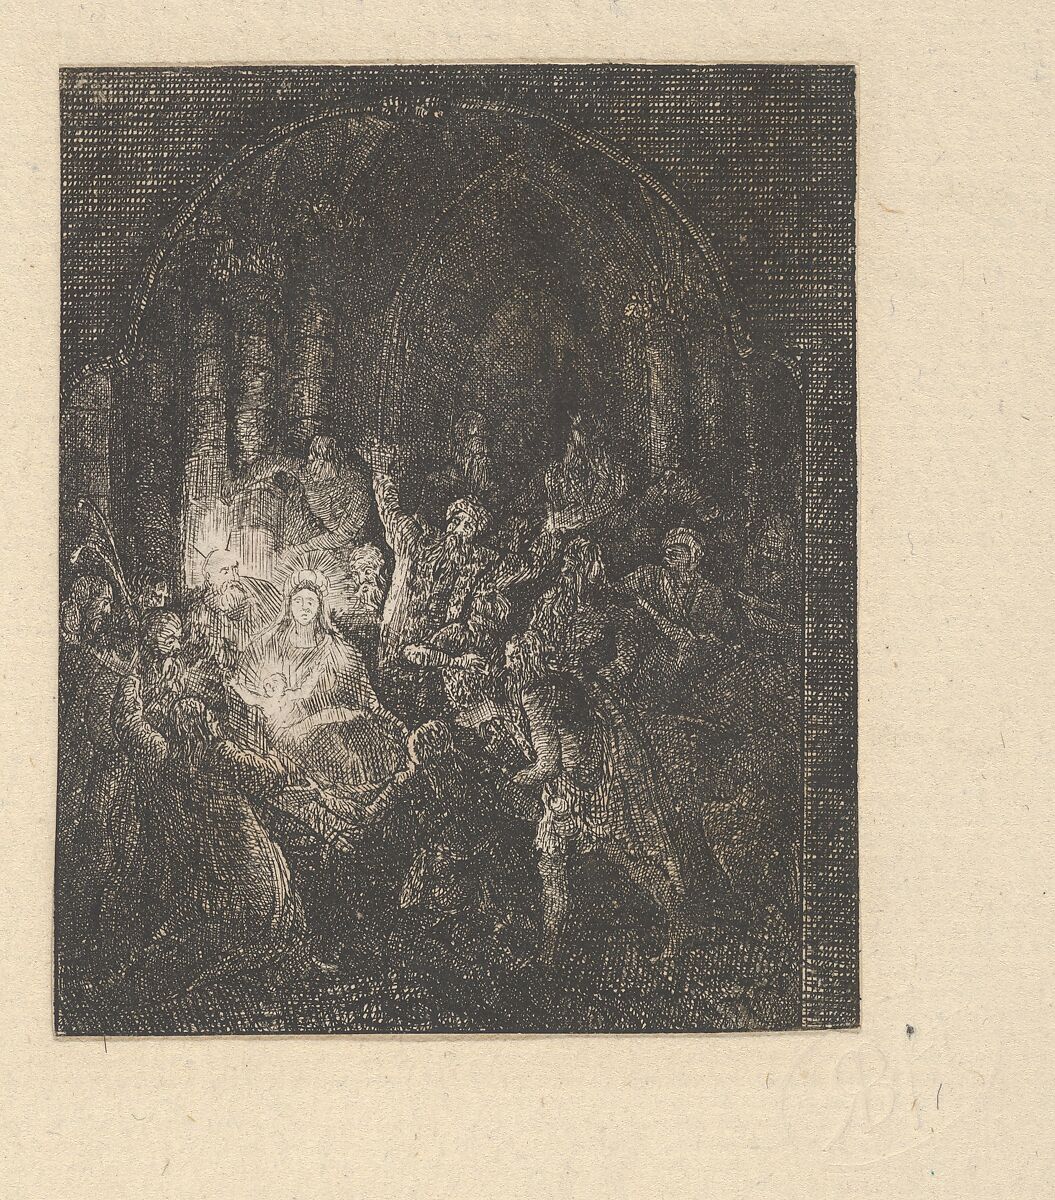 L'Adoration des Bergers (The Adoration of the Shepherds), Rodolphe Bresdin (French, Montrelais 1822–1885 Sèvres), Etching 